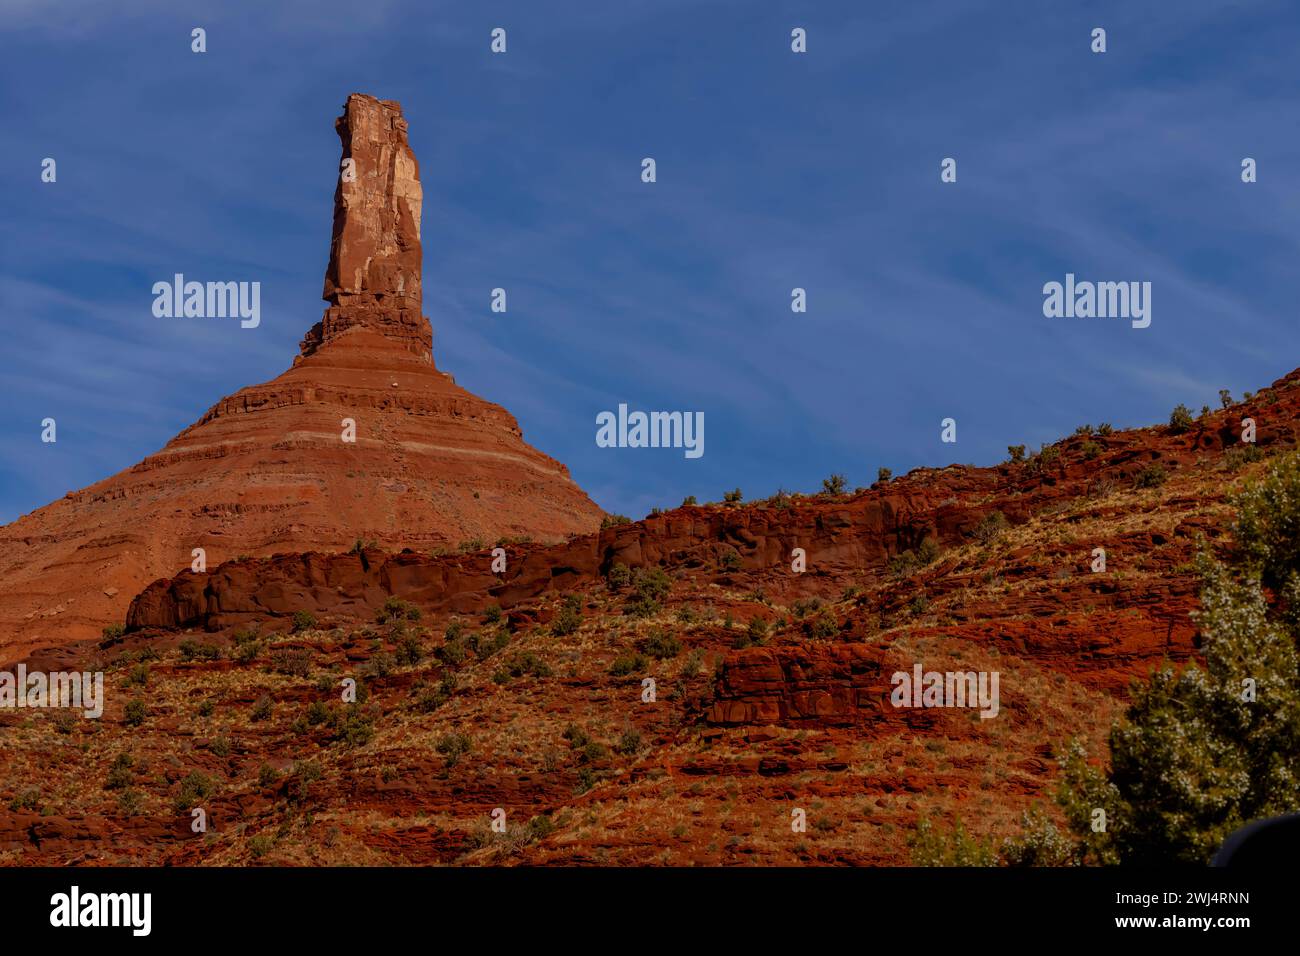 Aerial View Of Rock Formations In The American Southwest Stock Photo